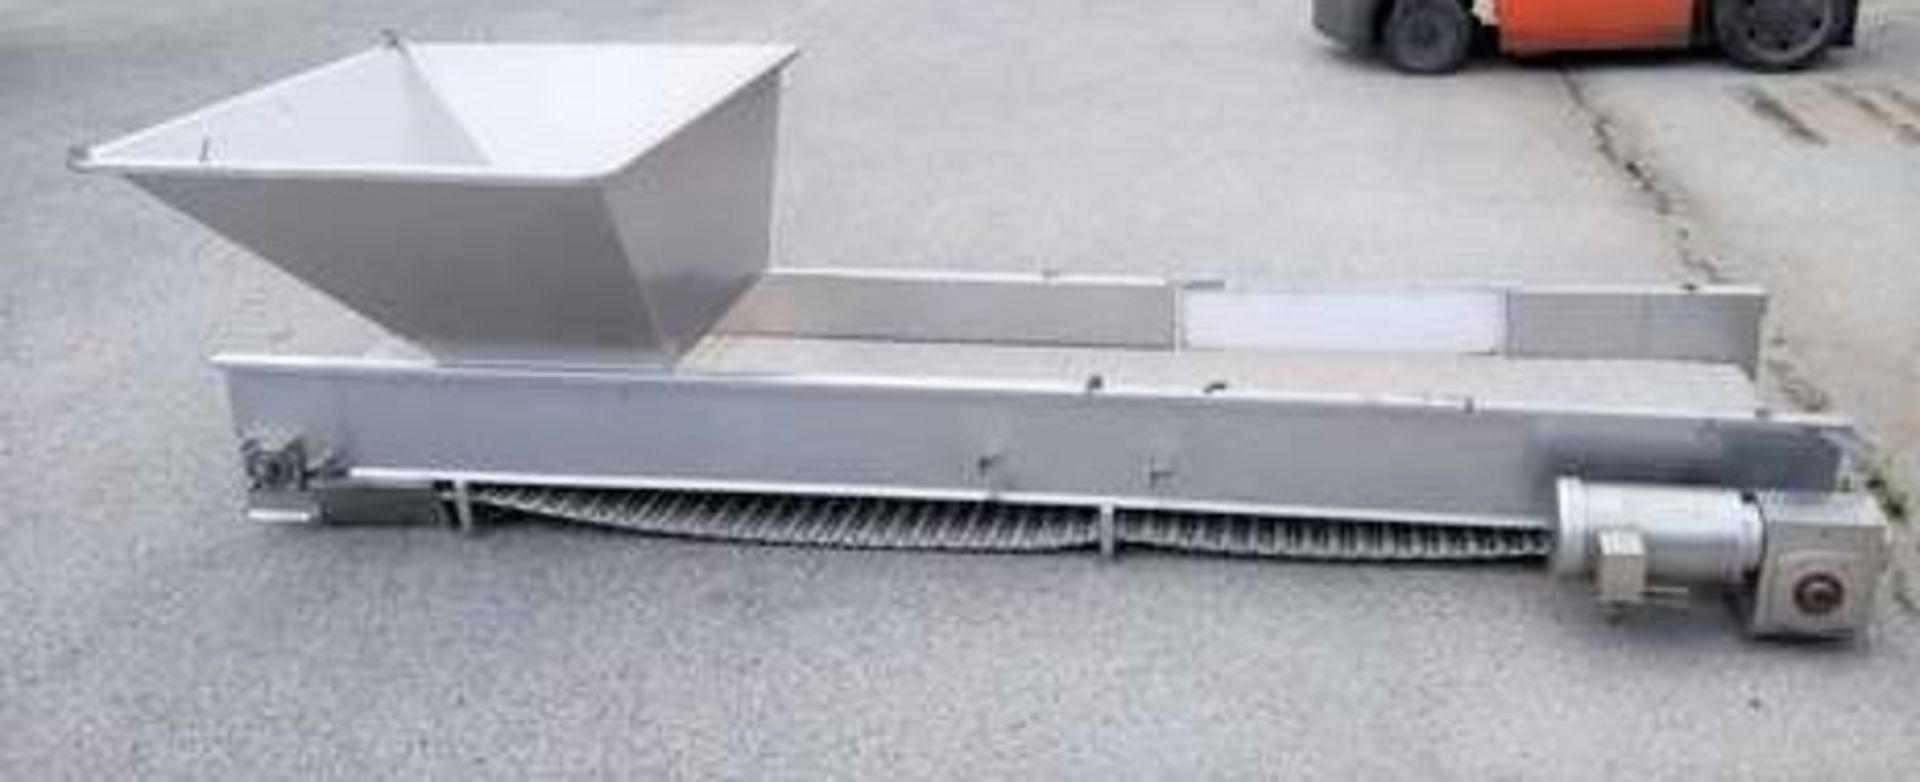 Flat UHMW belt S/S Conveyor with Hopper. 10'L x 24"W belt. Hopper is 17" in from infeed end. Product - Image 3 of 4